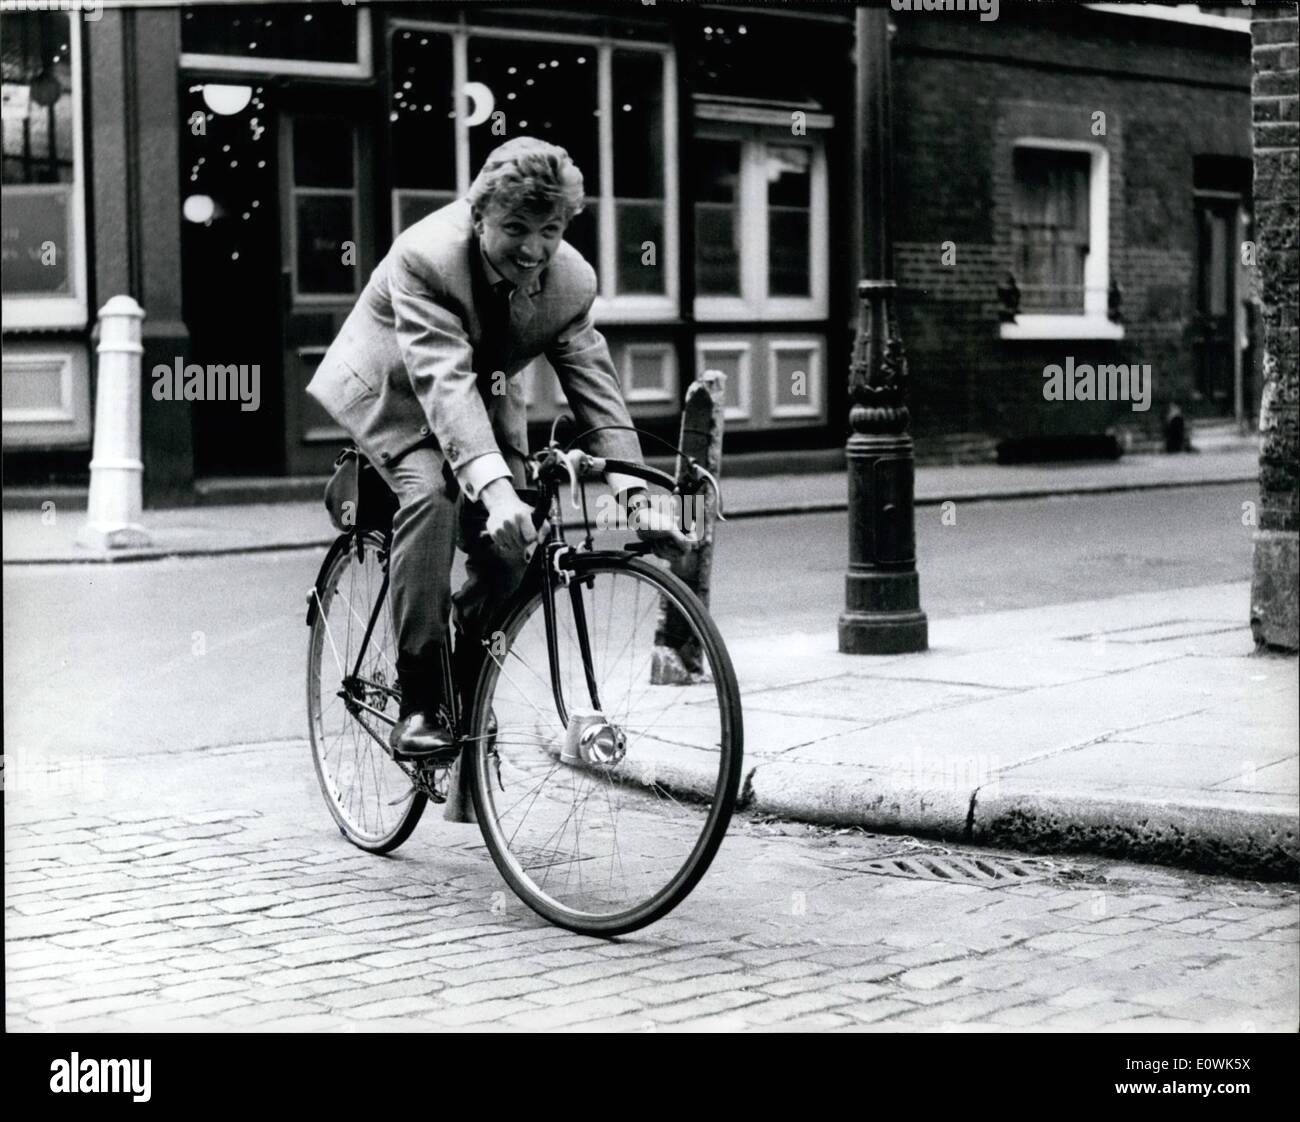 Jun. 18, 1963 - 18-6-63 Tommy Steele banned from driving, takes to bike. Singer Tommy Steele was fined &pound;30 and disqualified from driving for a year yesterday, for driving at a dangerous speed. It was stated that he was driving his M.G. sports car at 90 mph over the Hammersmith fly-over in West London. Last night he borrowed a bike and went for a trial spin. Photo Shows: Tommy Steele borrows a bike and goes for a trial spin in London last night. Stock Photo